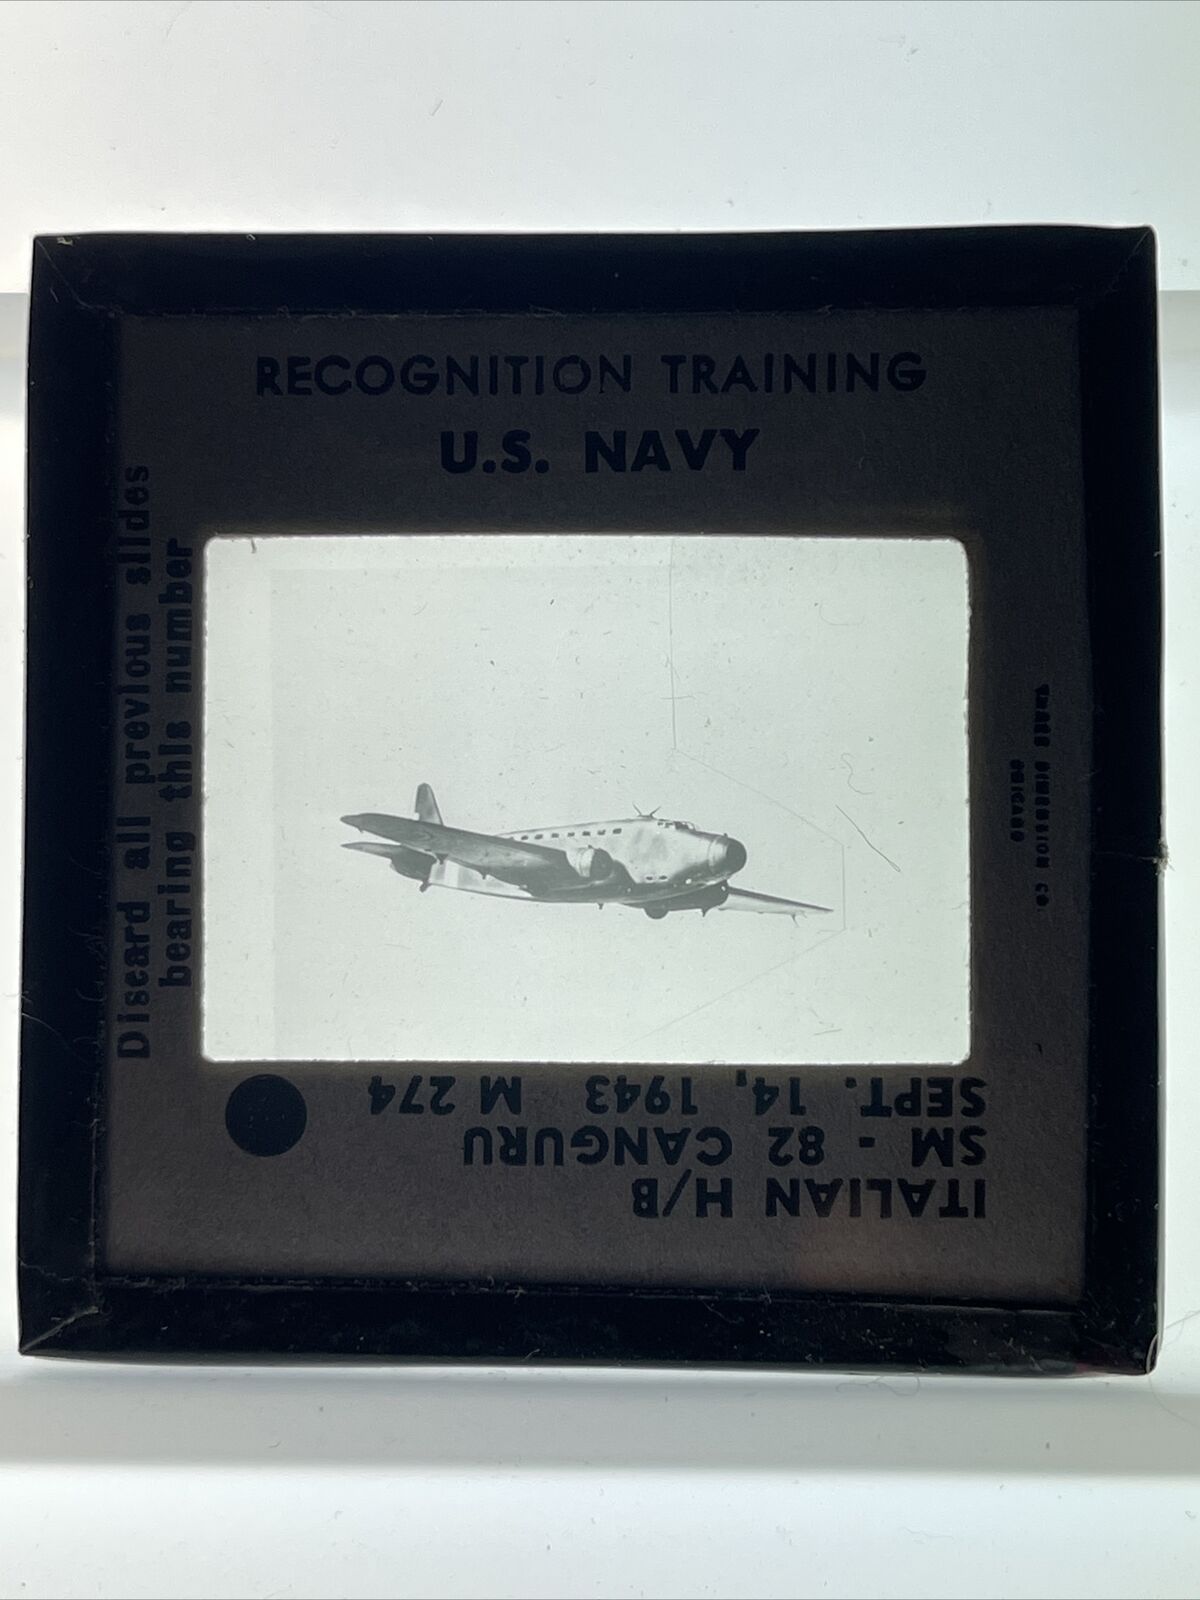 WWII USAF Recognition Training Glass Slide Military US NAVY Italy Canguru SM 82